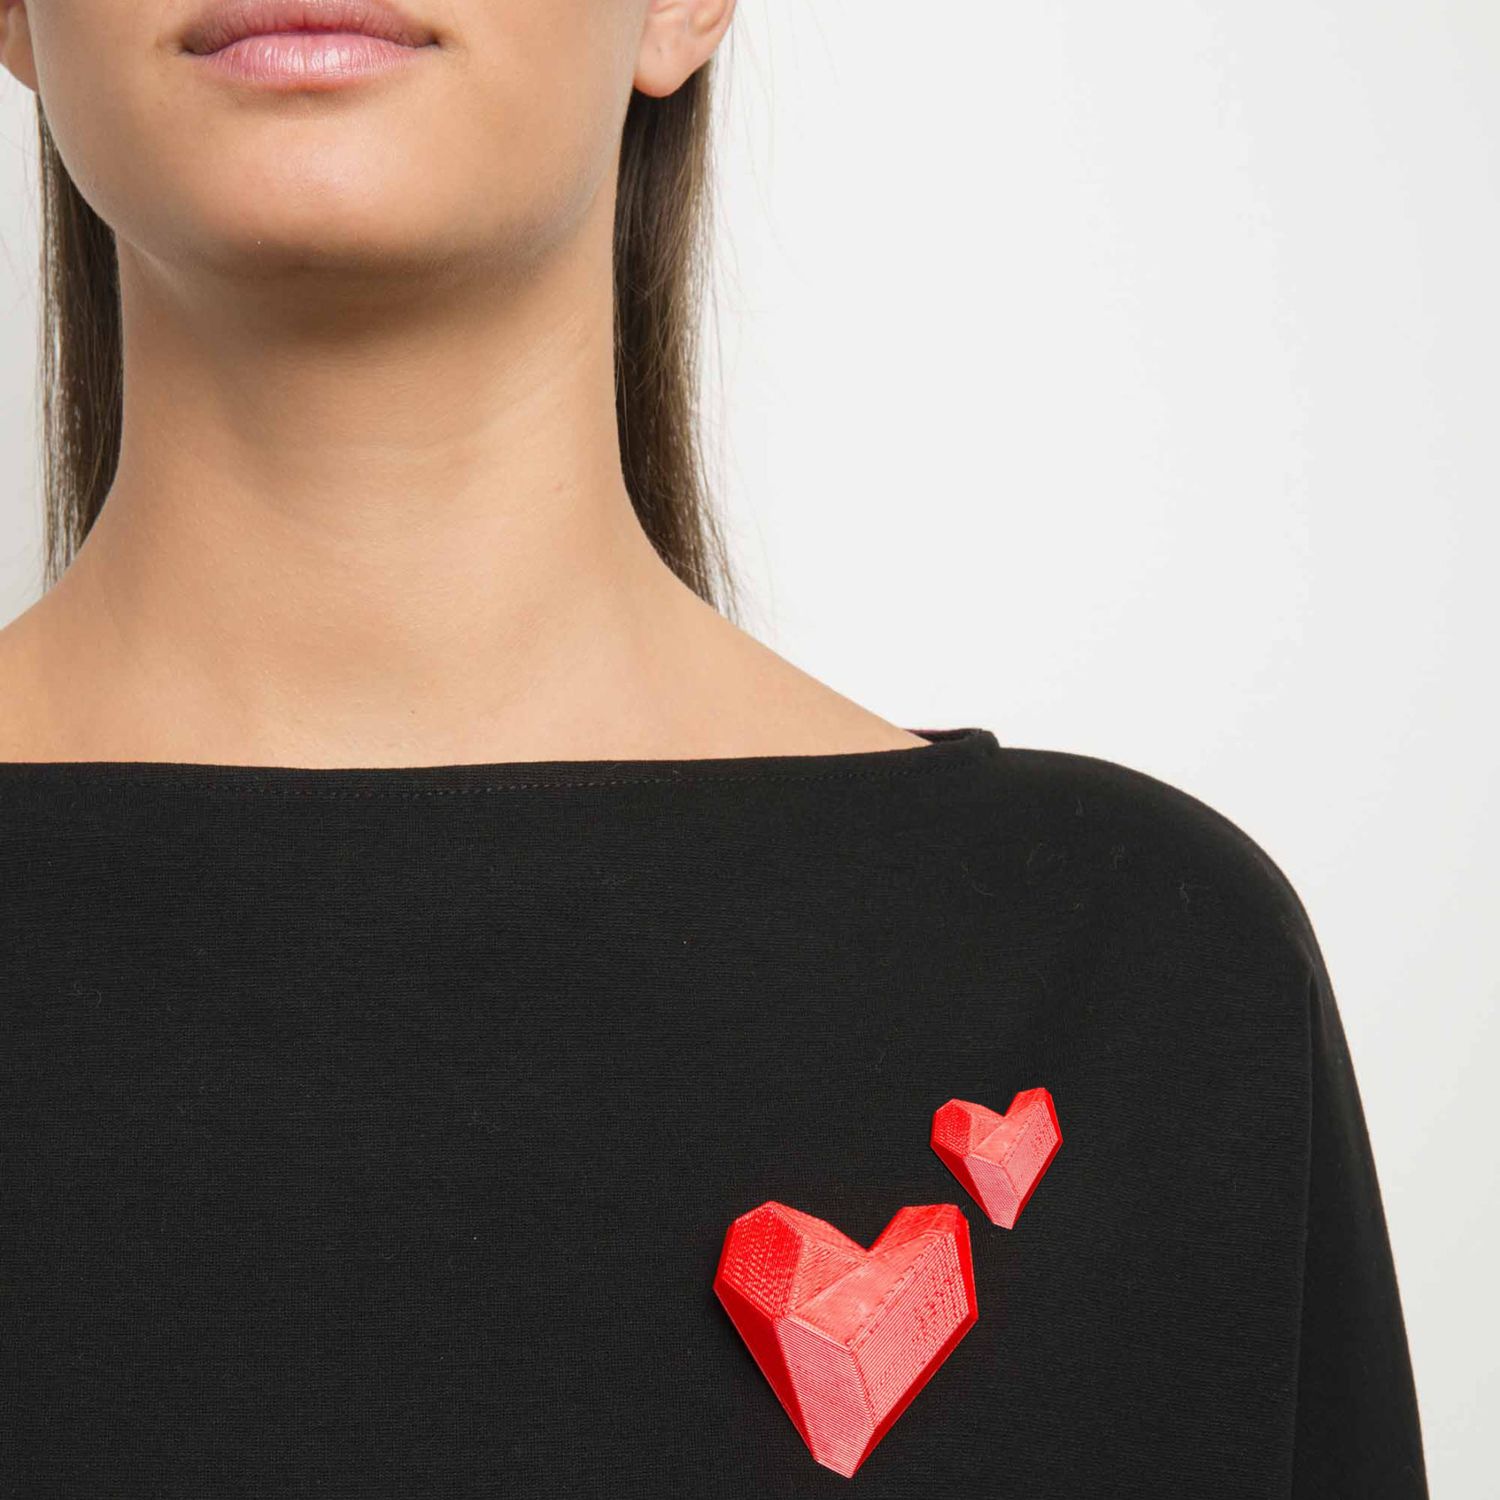 Maison 203: Heart Brooch – Black Product Image 3 of 3